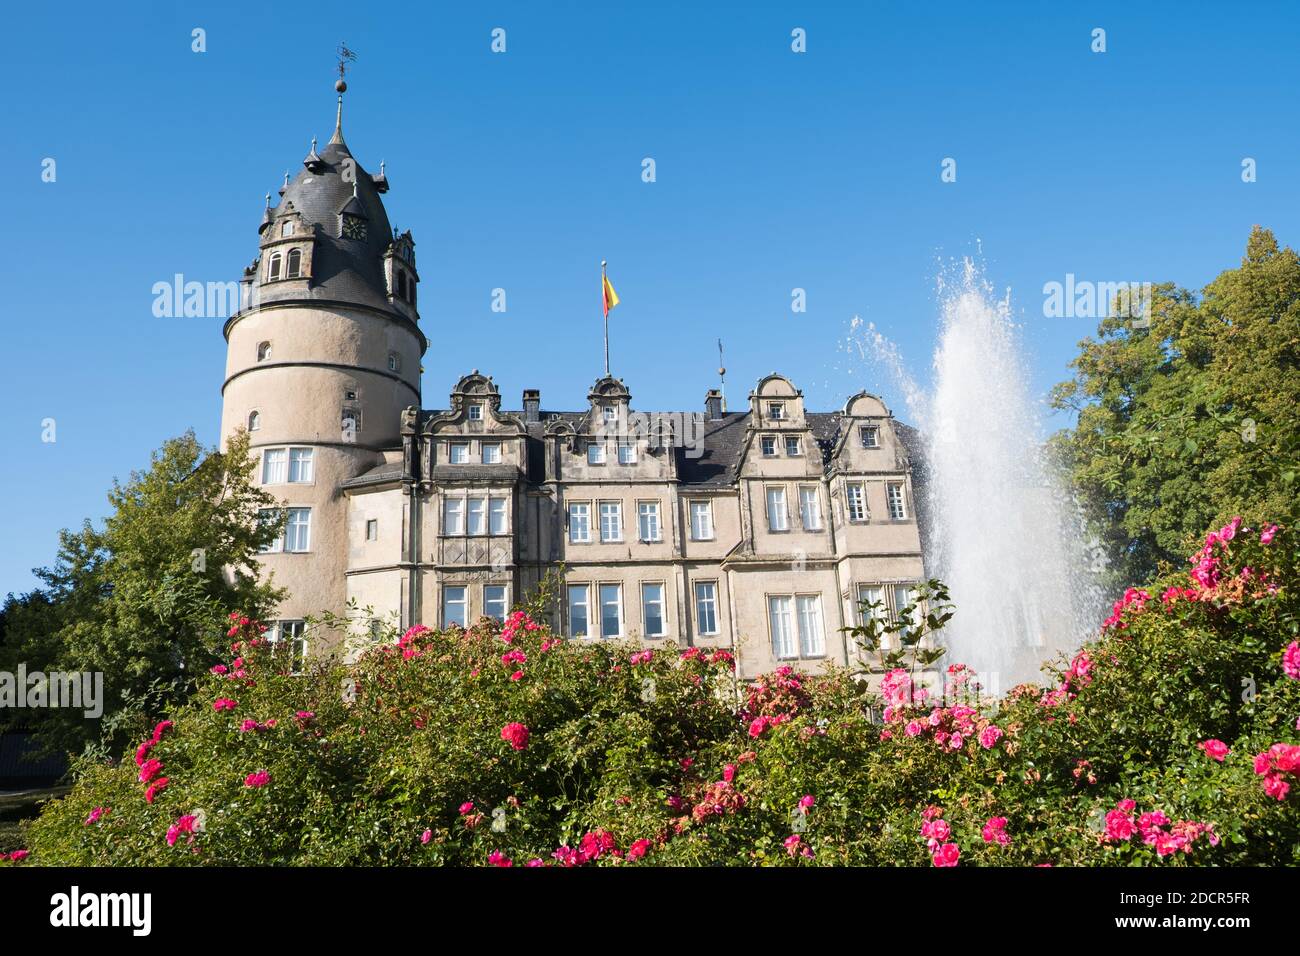 Princely Residence Castle in Detmold, Germany Stock Photo